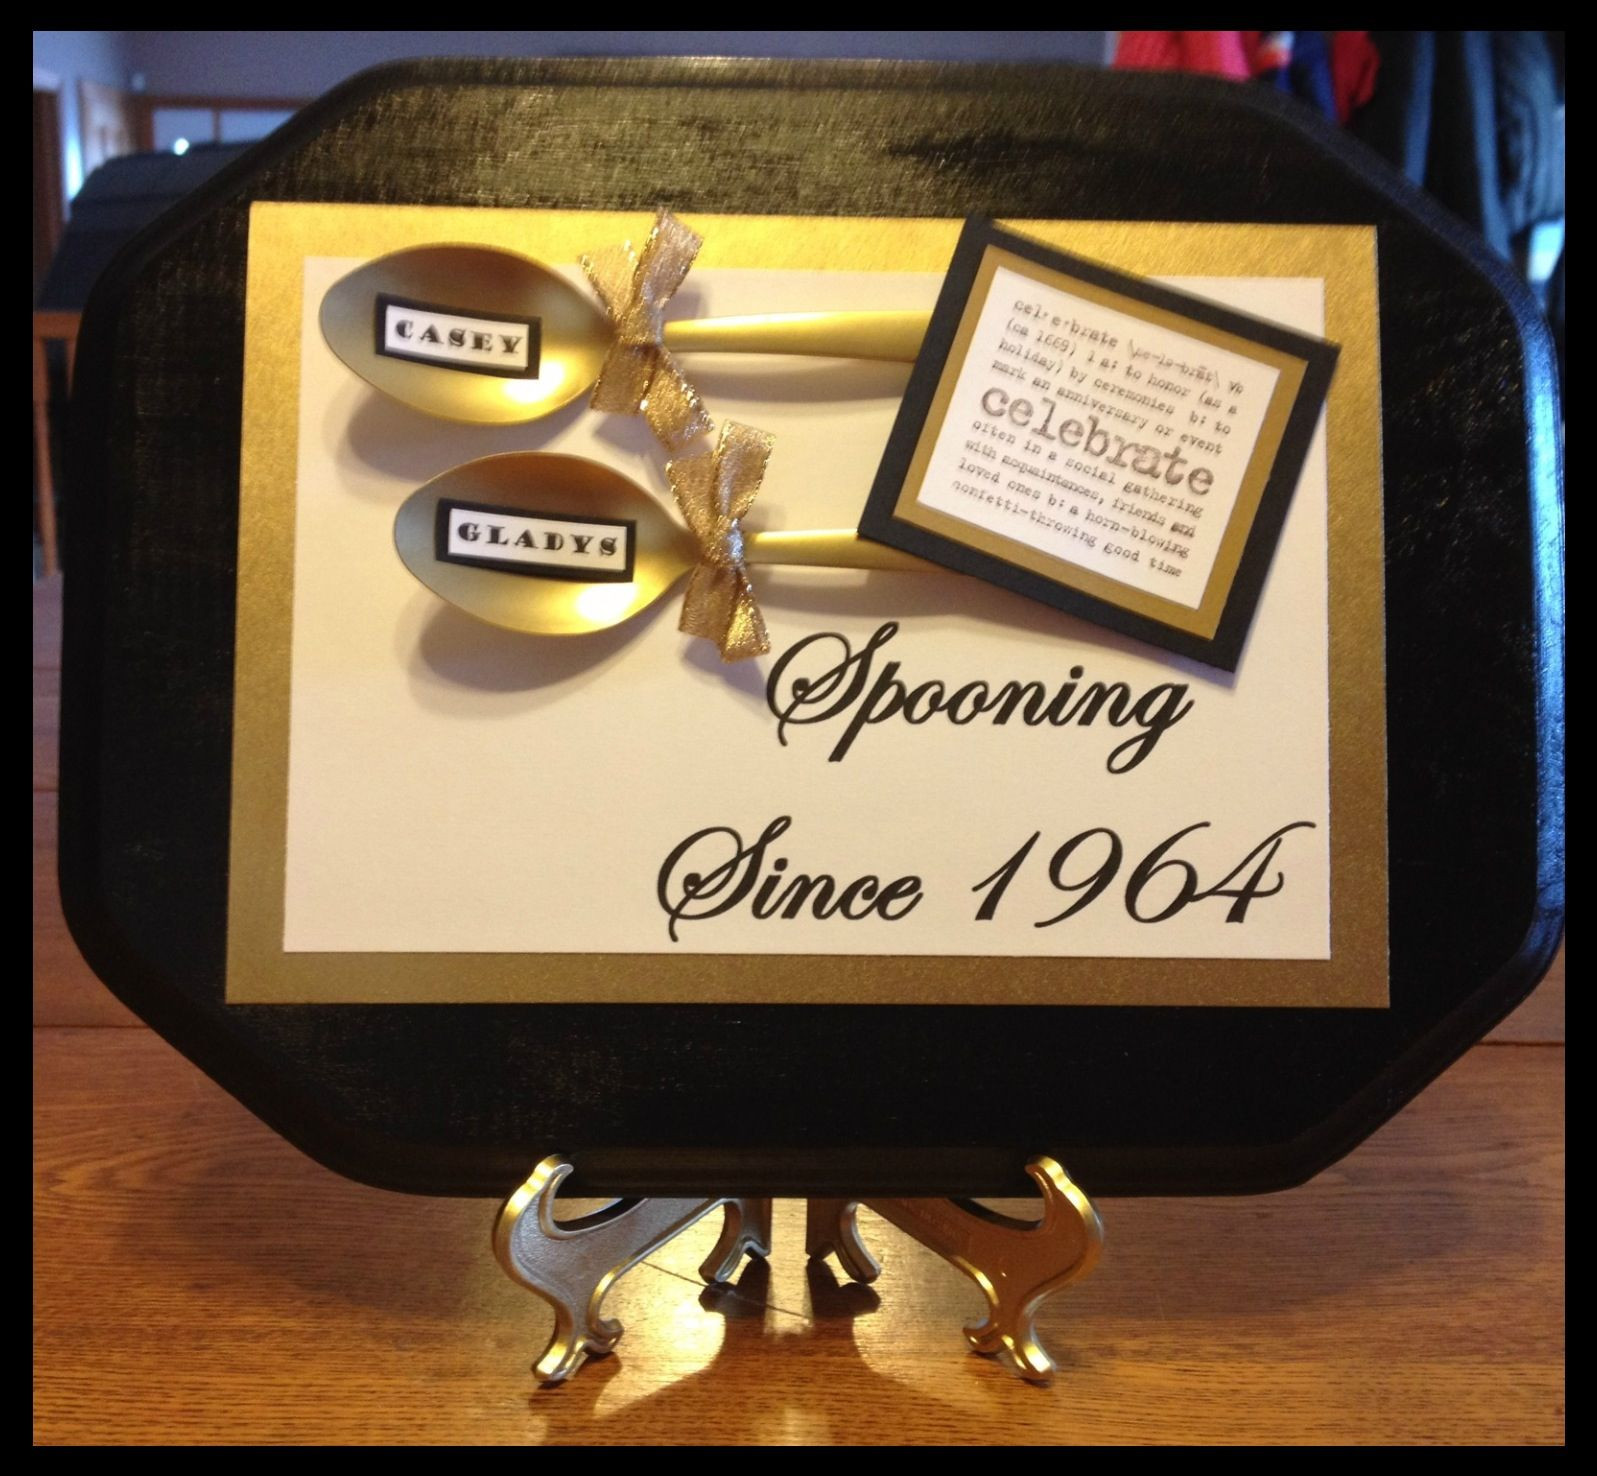 Fiftieth Wedding Anniversary Gift Ideas
 Pin by DJ Peter on 50th Birthday cakes